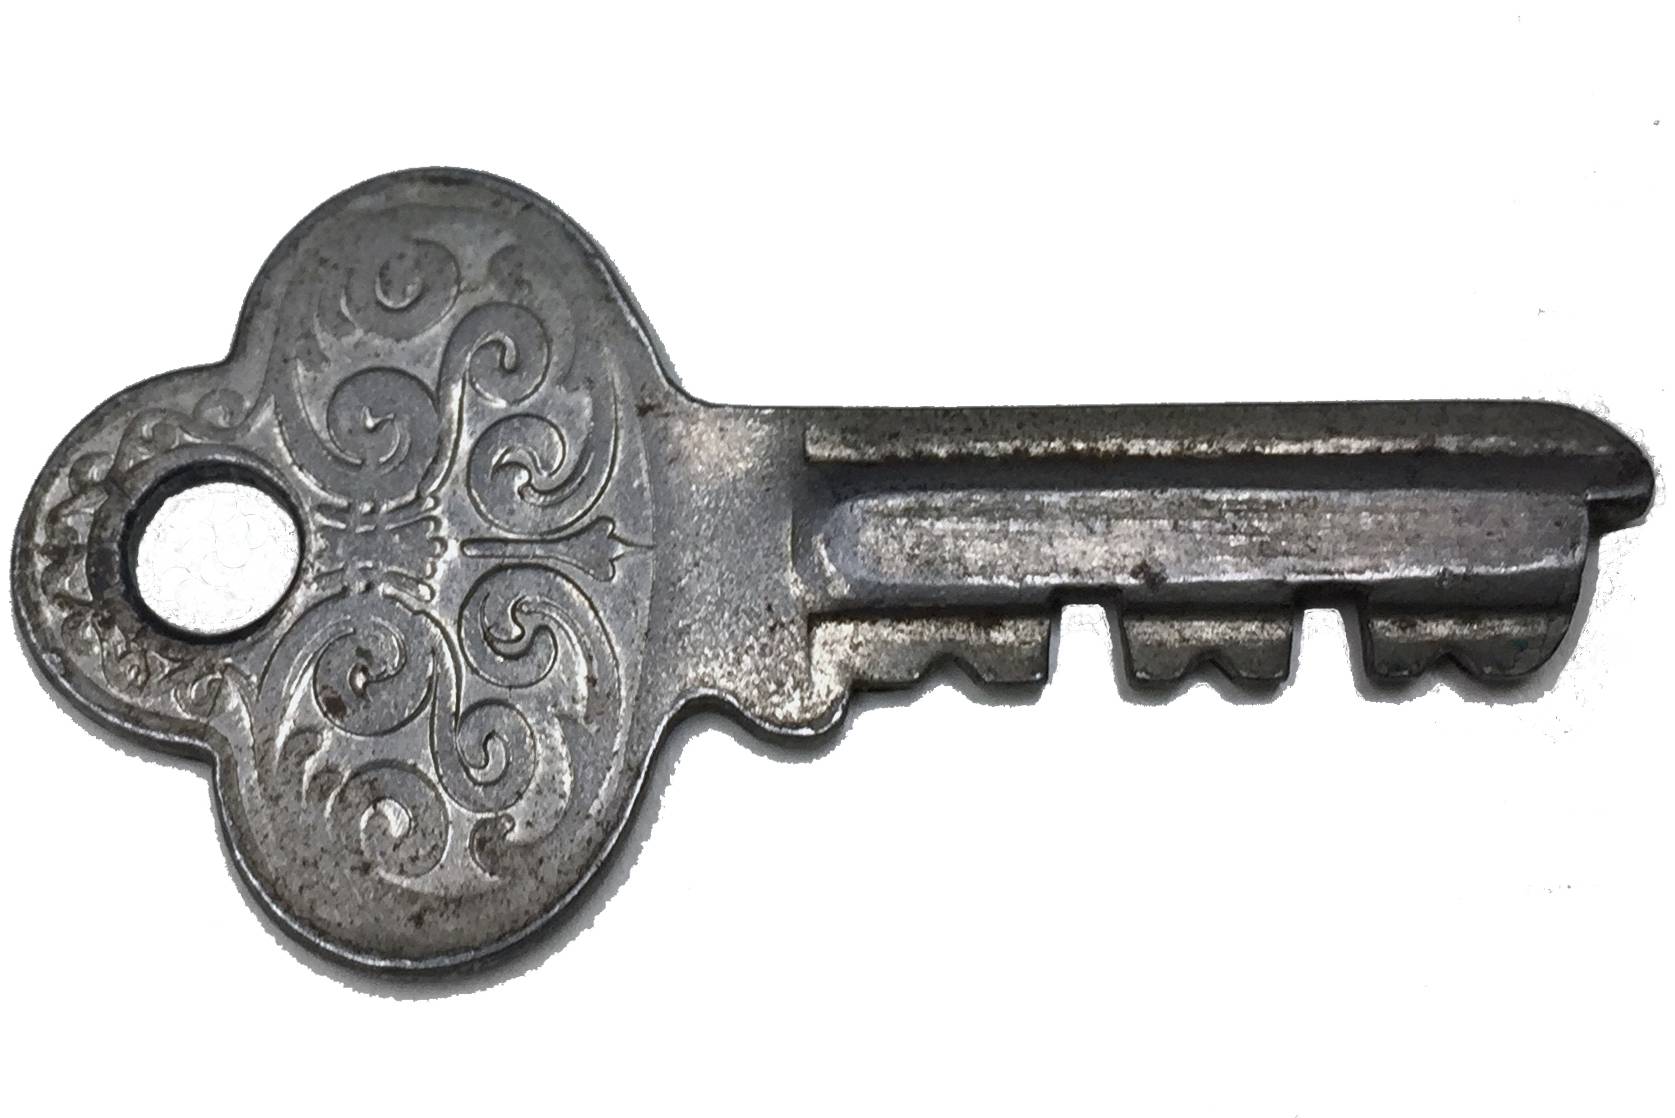 Photograph of an original key from the C.E. Evans Papers